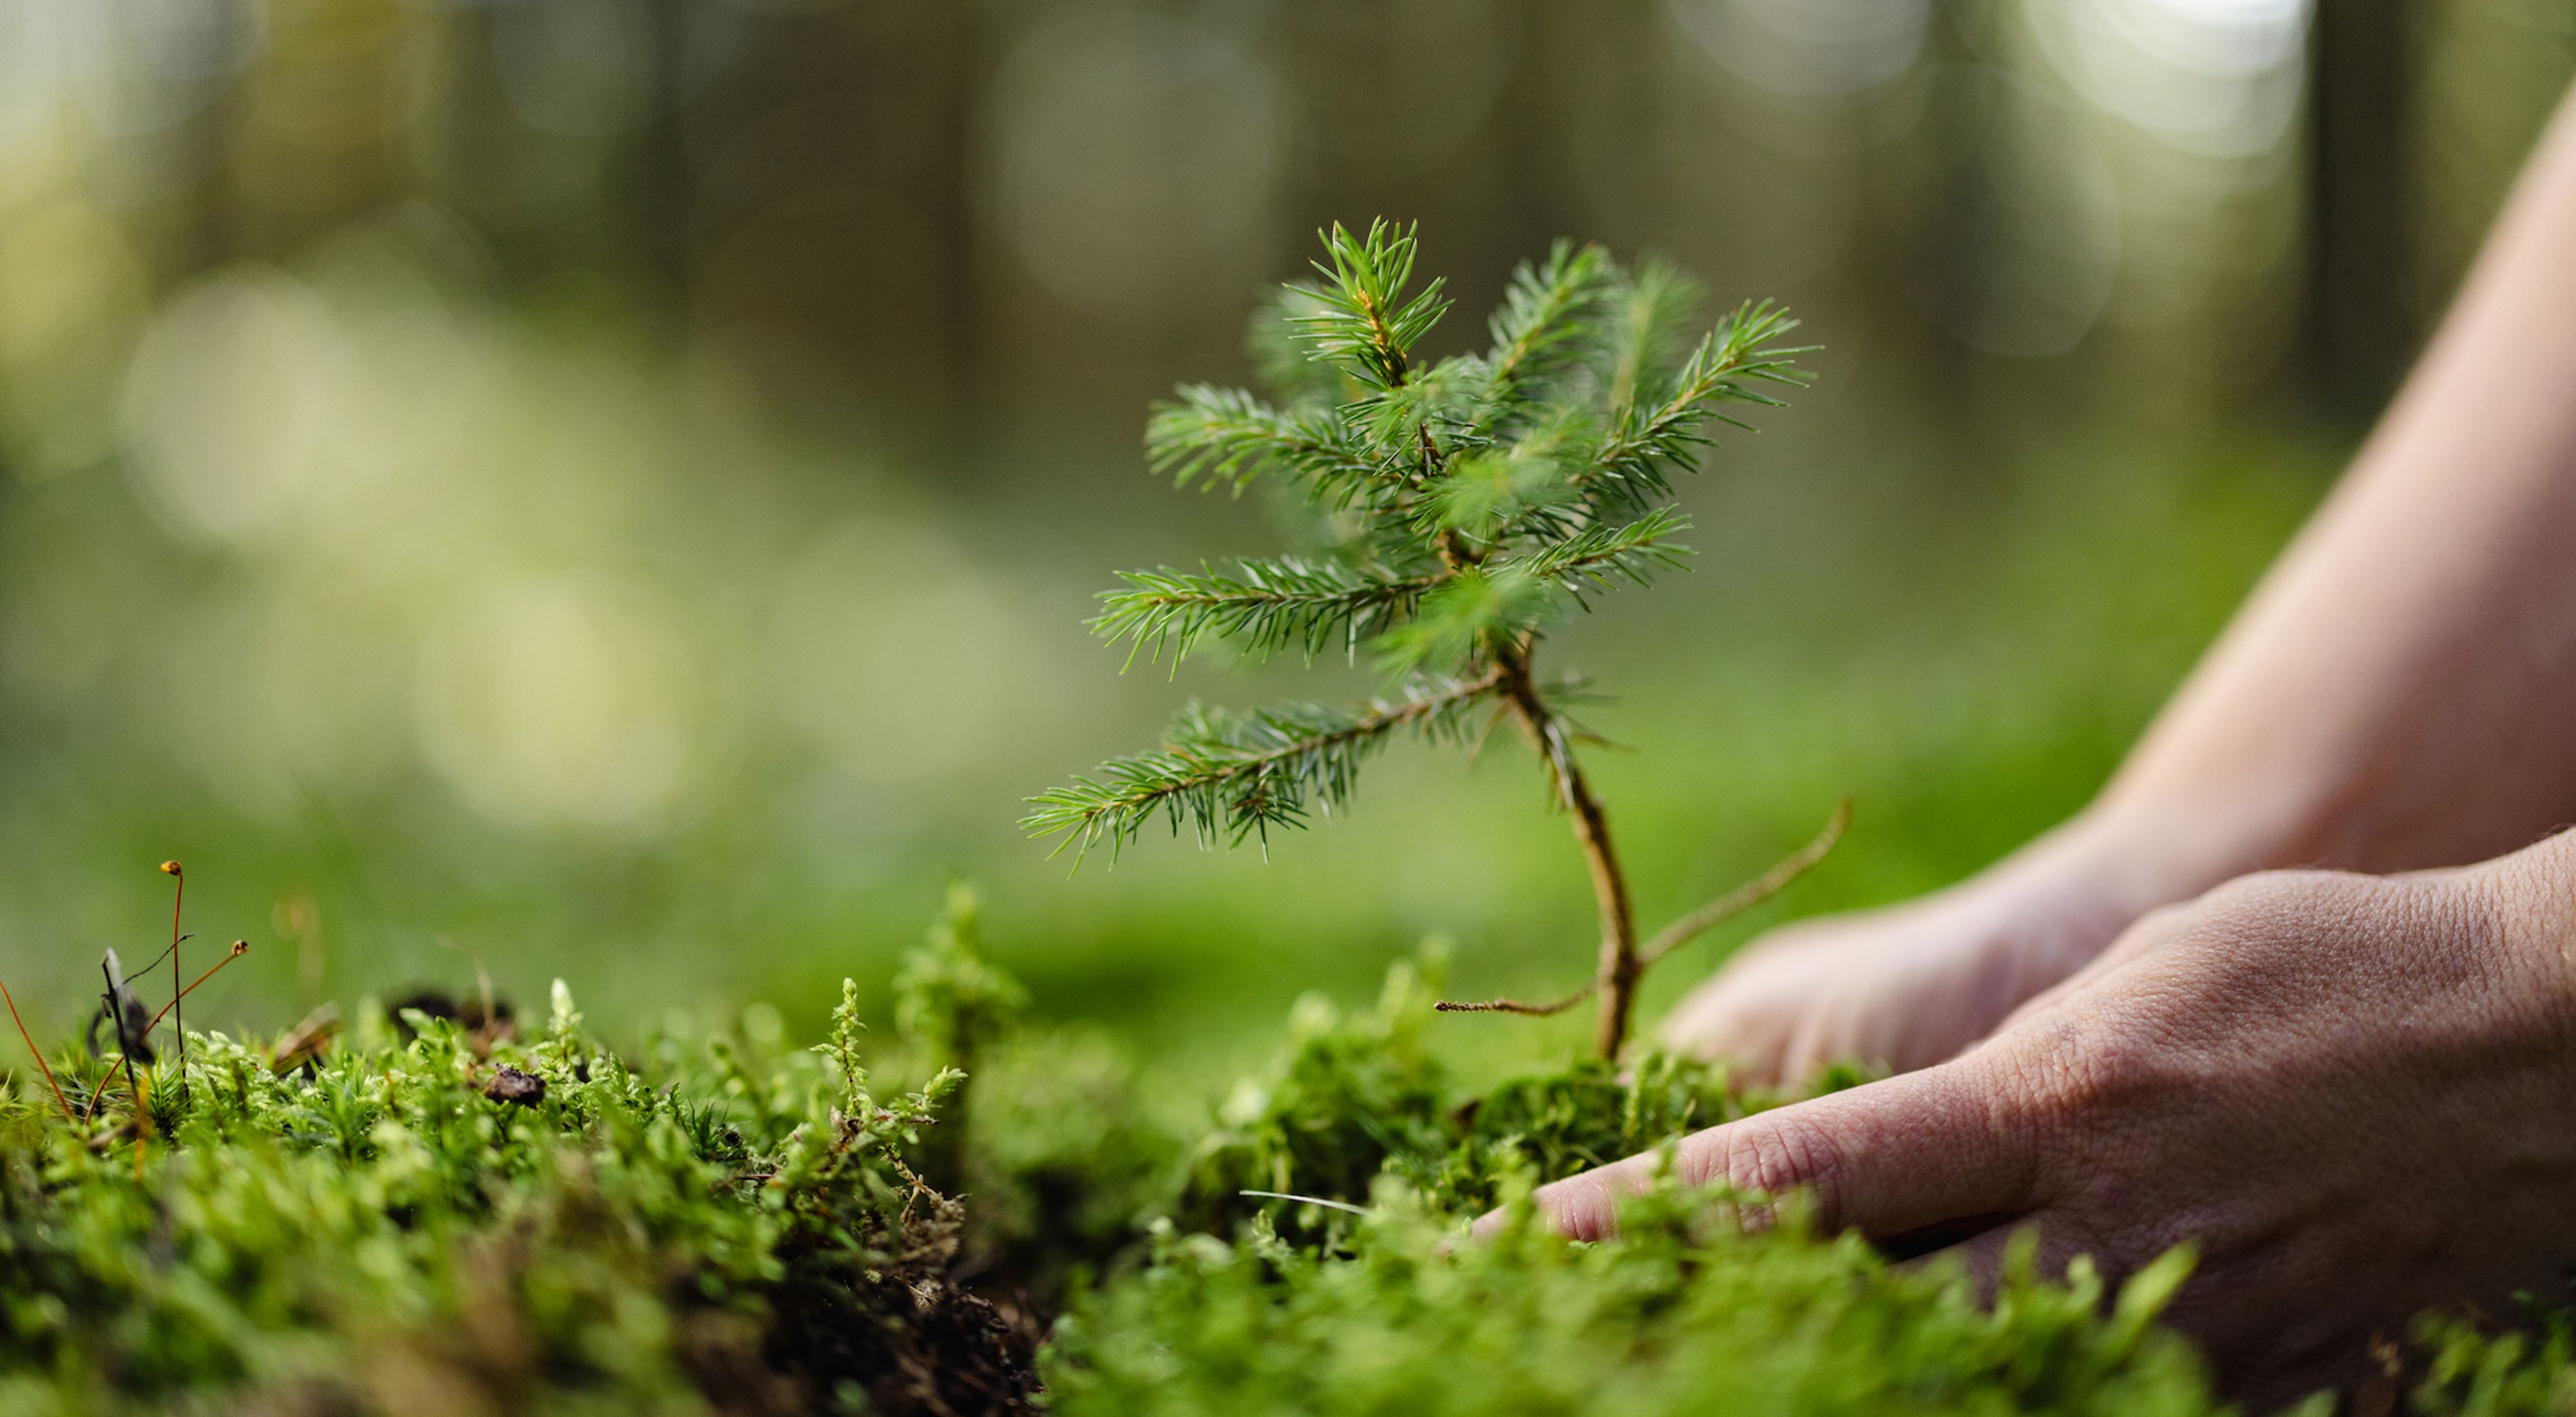  Hands planting a tree in a forest.